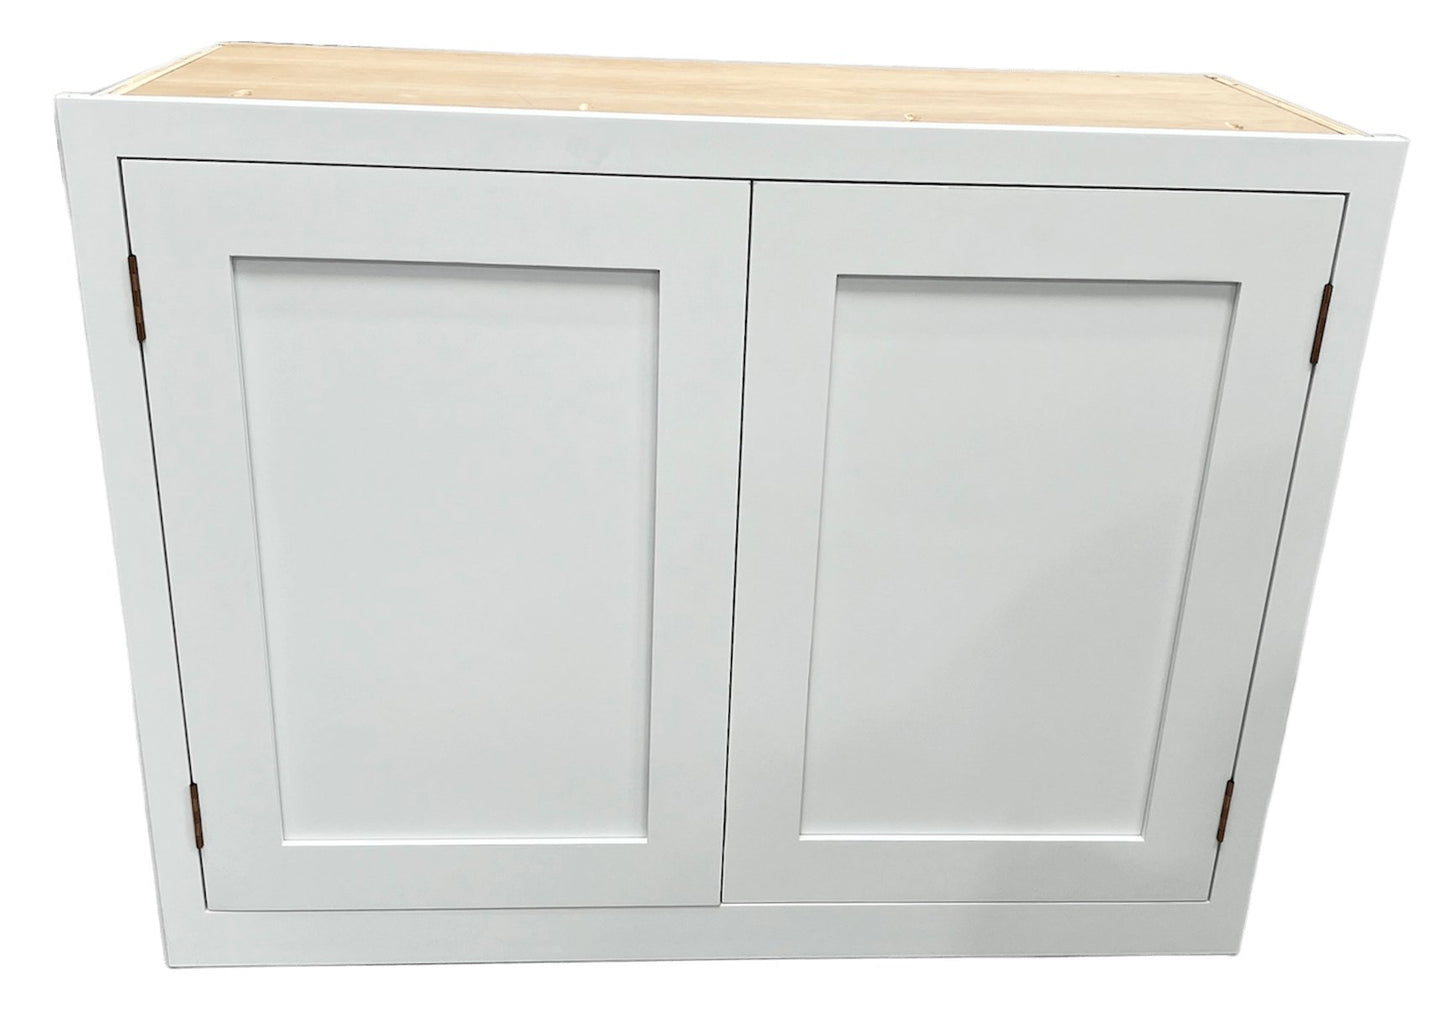 WC 1000 - 1000mm Wide Double door Wall cabinet - Classic Kitchens Direct